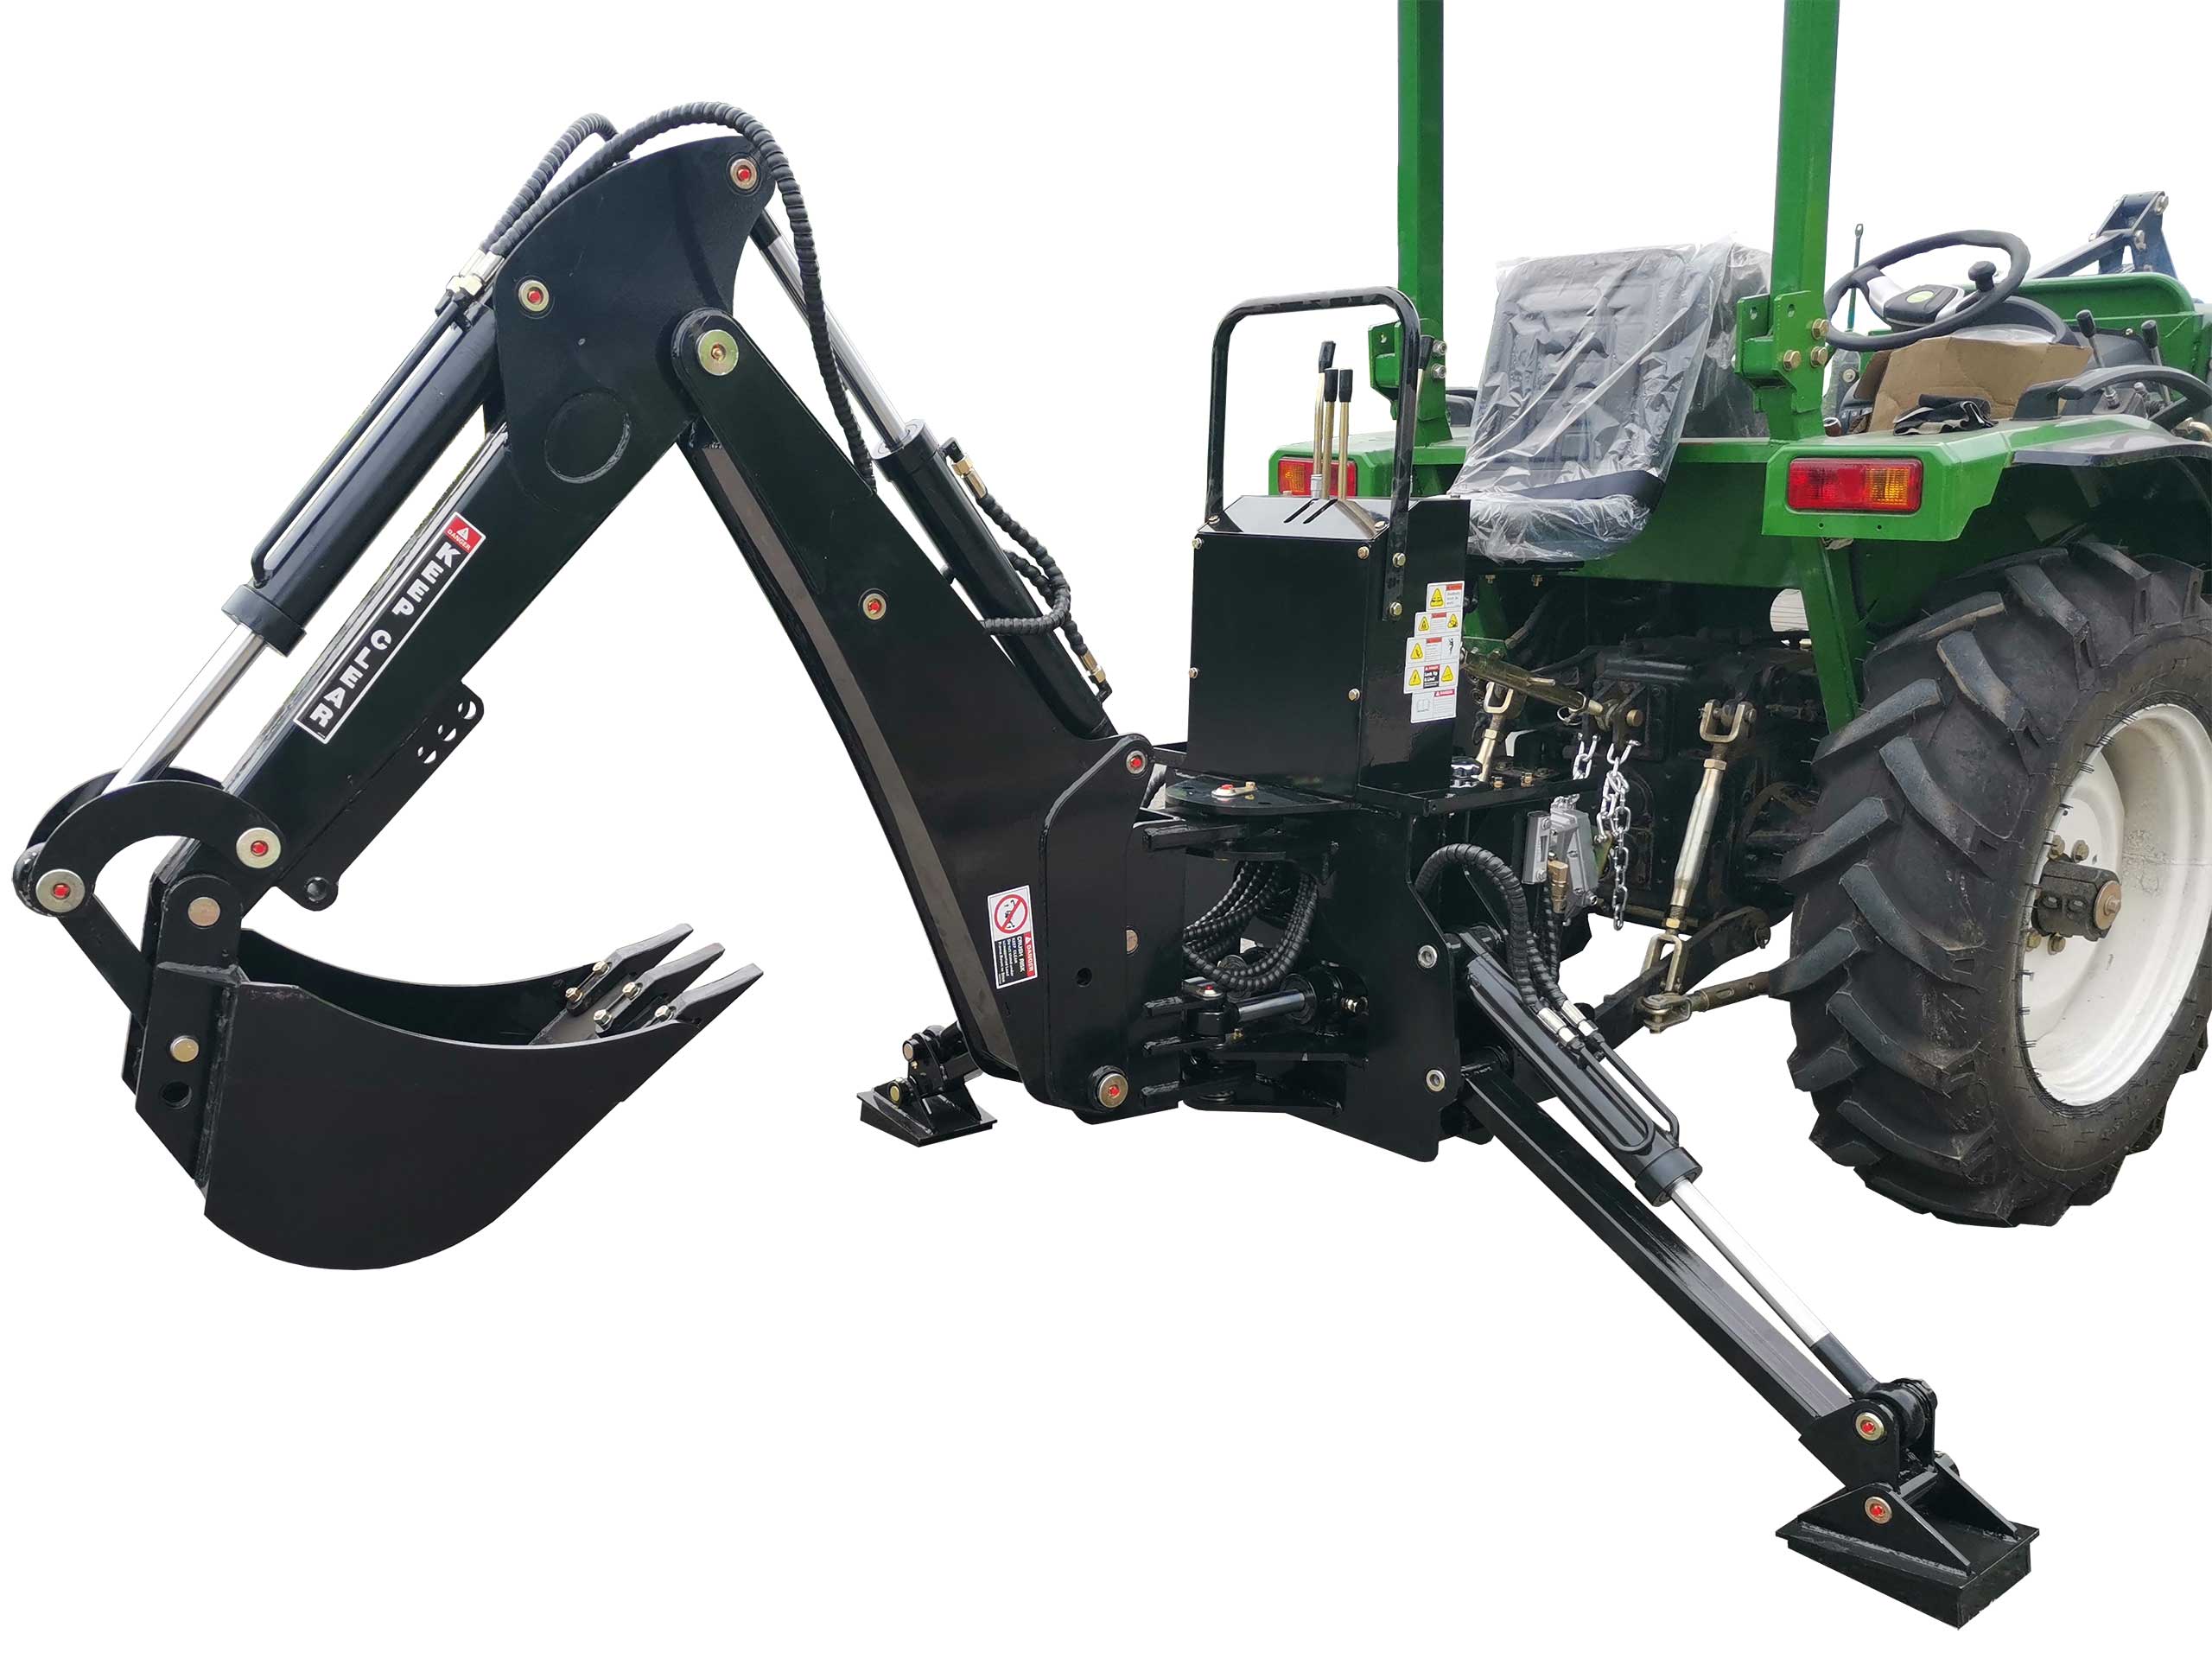 Bh 7 Backhoe Attachment For Tractor Heavy Duty And Versatile